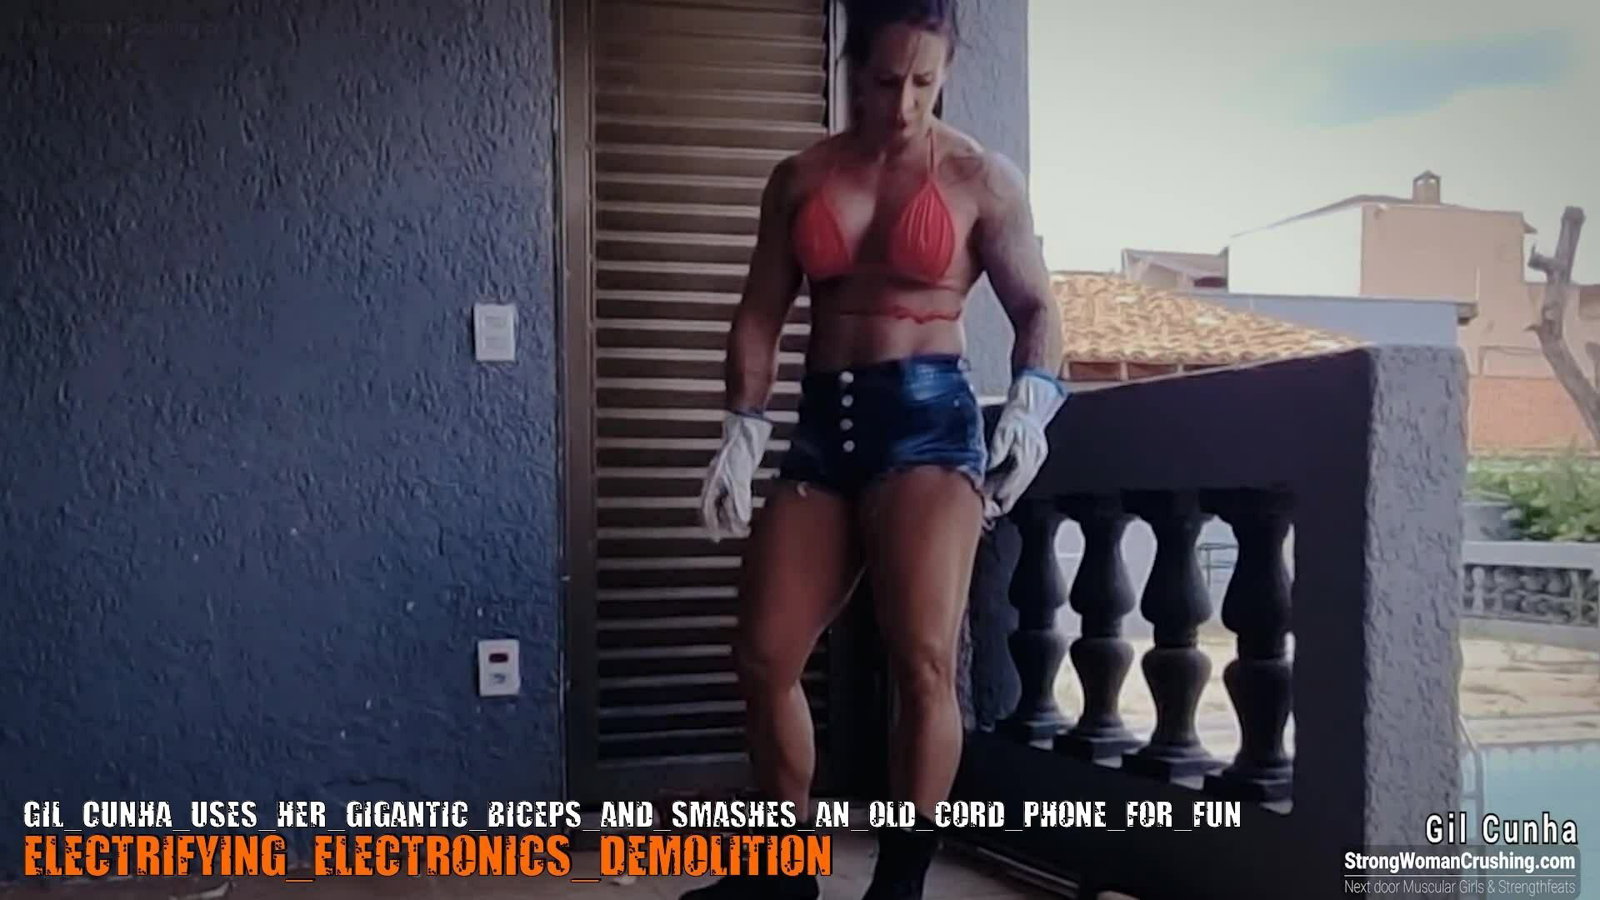 Photo by MusclegirlStrength with the username @MusclegirlStrength, who is a brand user,  October 15, 2023 at 1:53 PM and the text says '🔥 Calling all muscle worshipers! 🔥
Watch Gil Cunha's jaw-dropping strength in action 💪💥
She effortlessly crushes an old cord phone with her powerful biceps 📞💪
Get exclusive access to this mind-blowing video at www.strongwomancrushing.com 💻✨..'